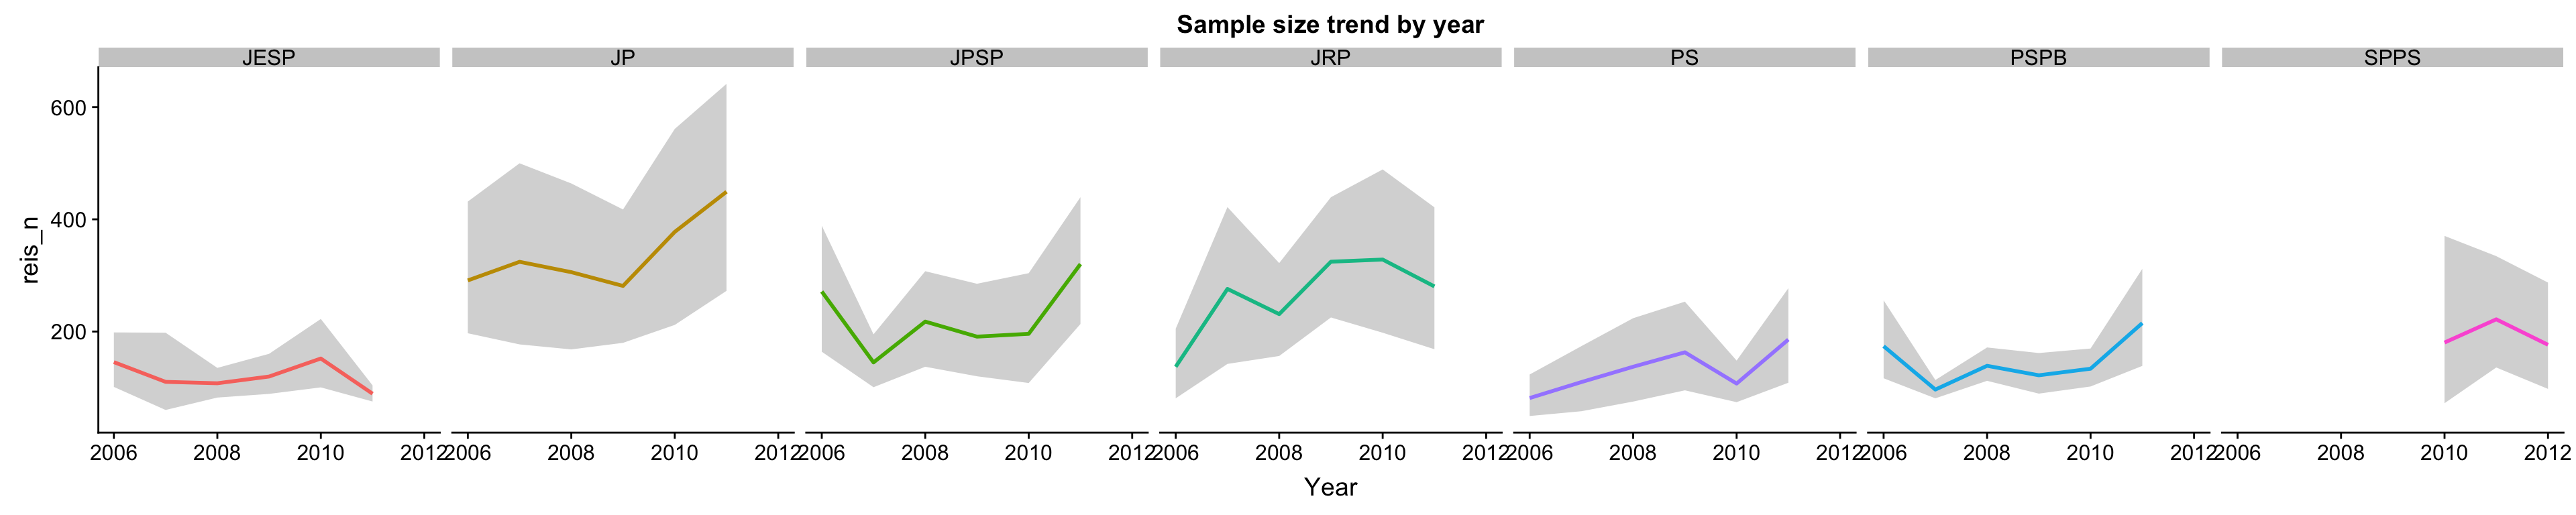 We do not collect bigger samples over time.